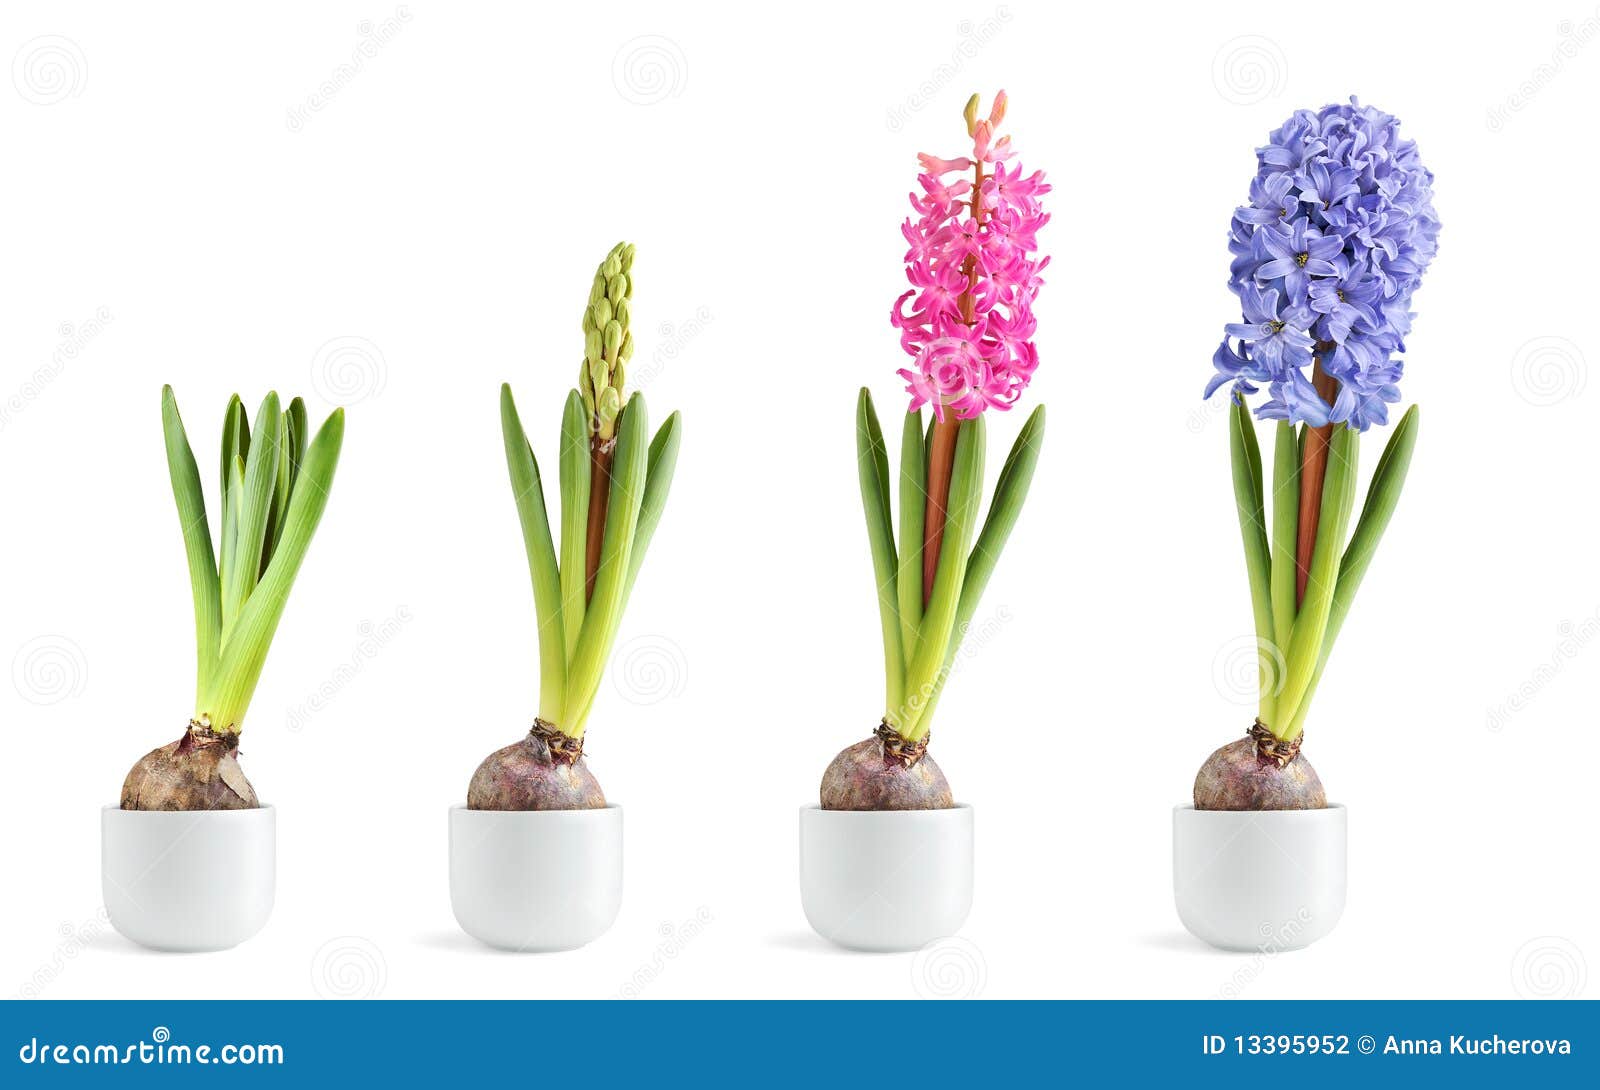 pink and blue hyacinth blooming